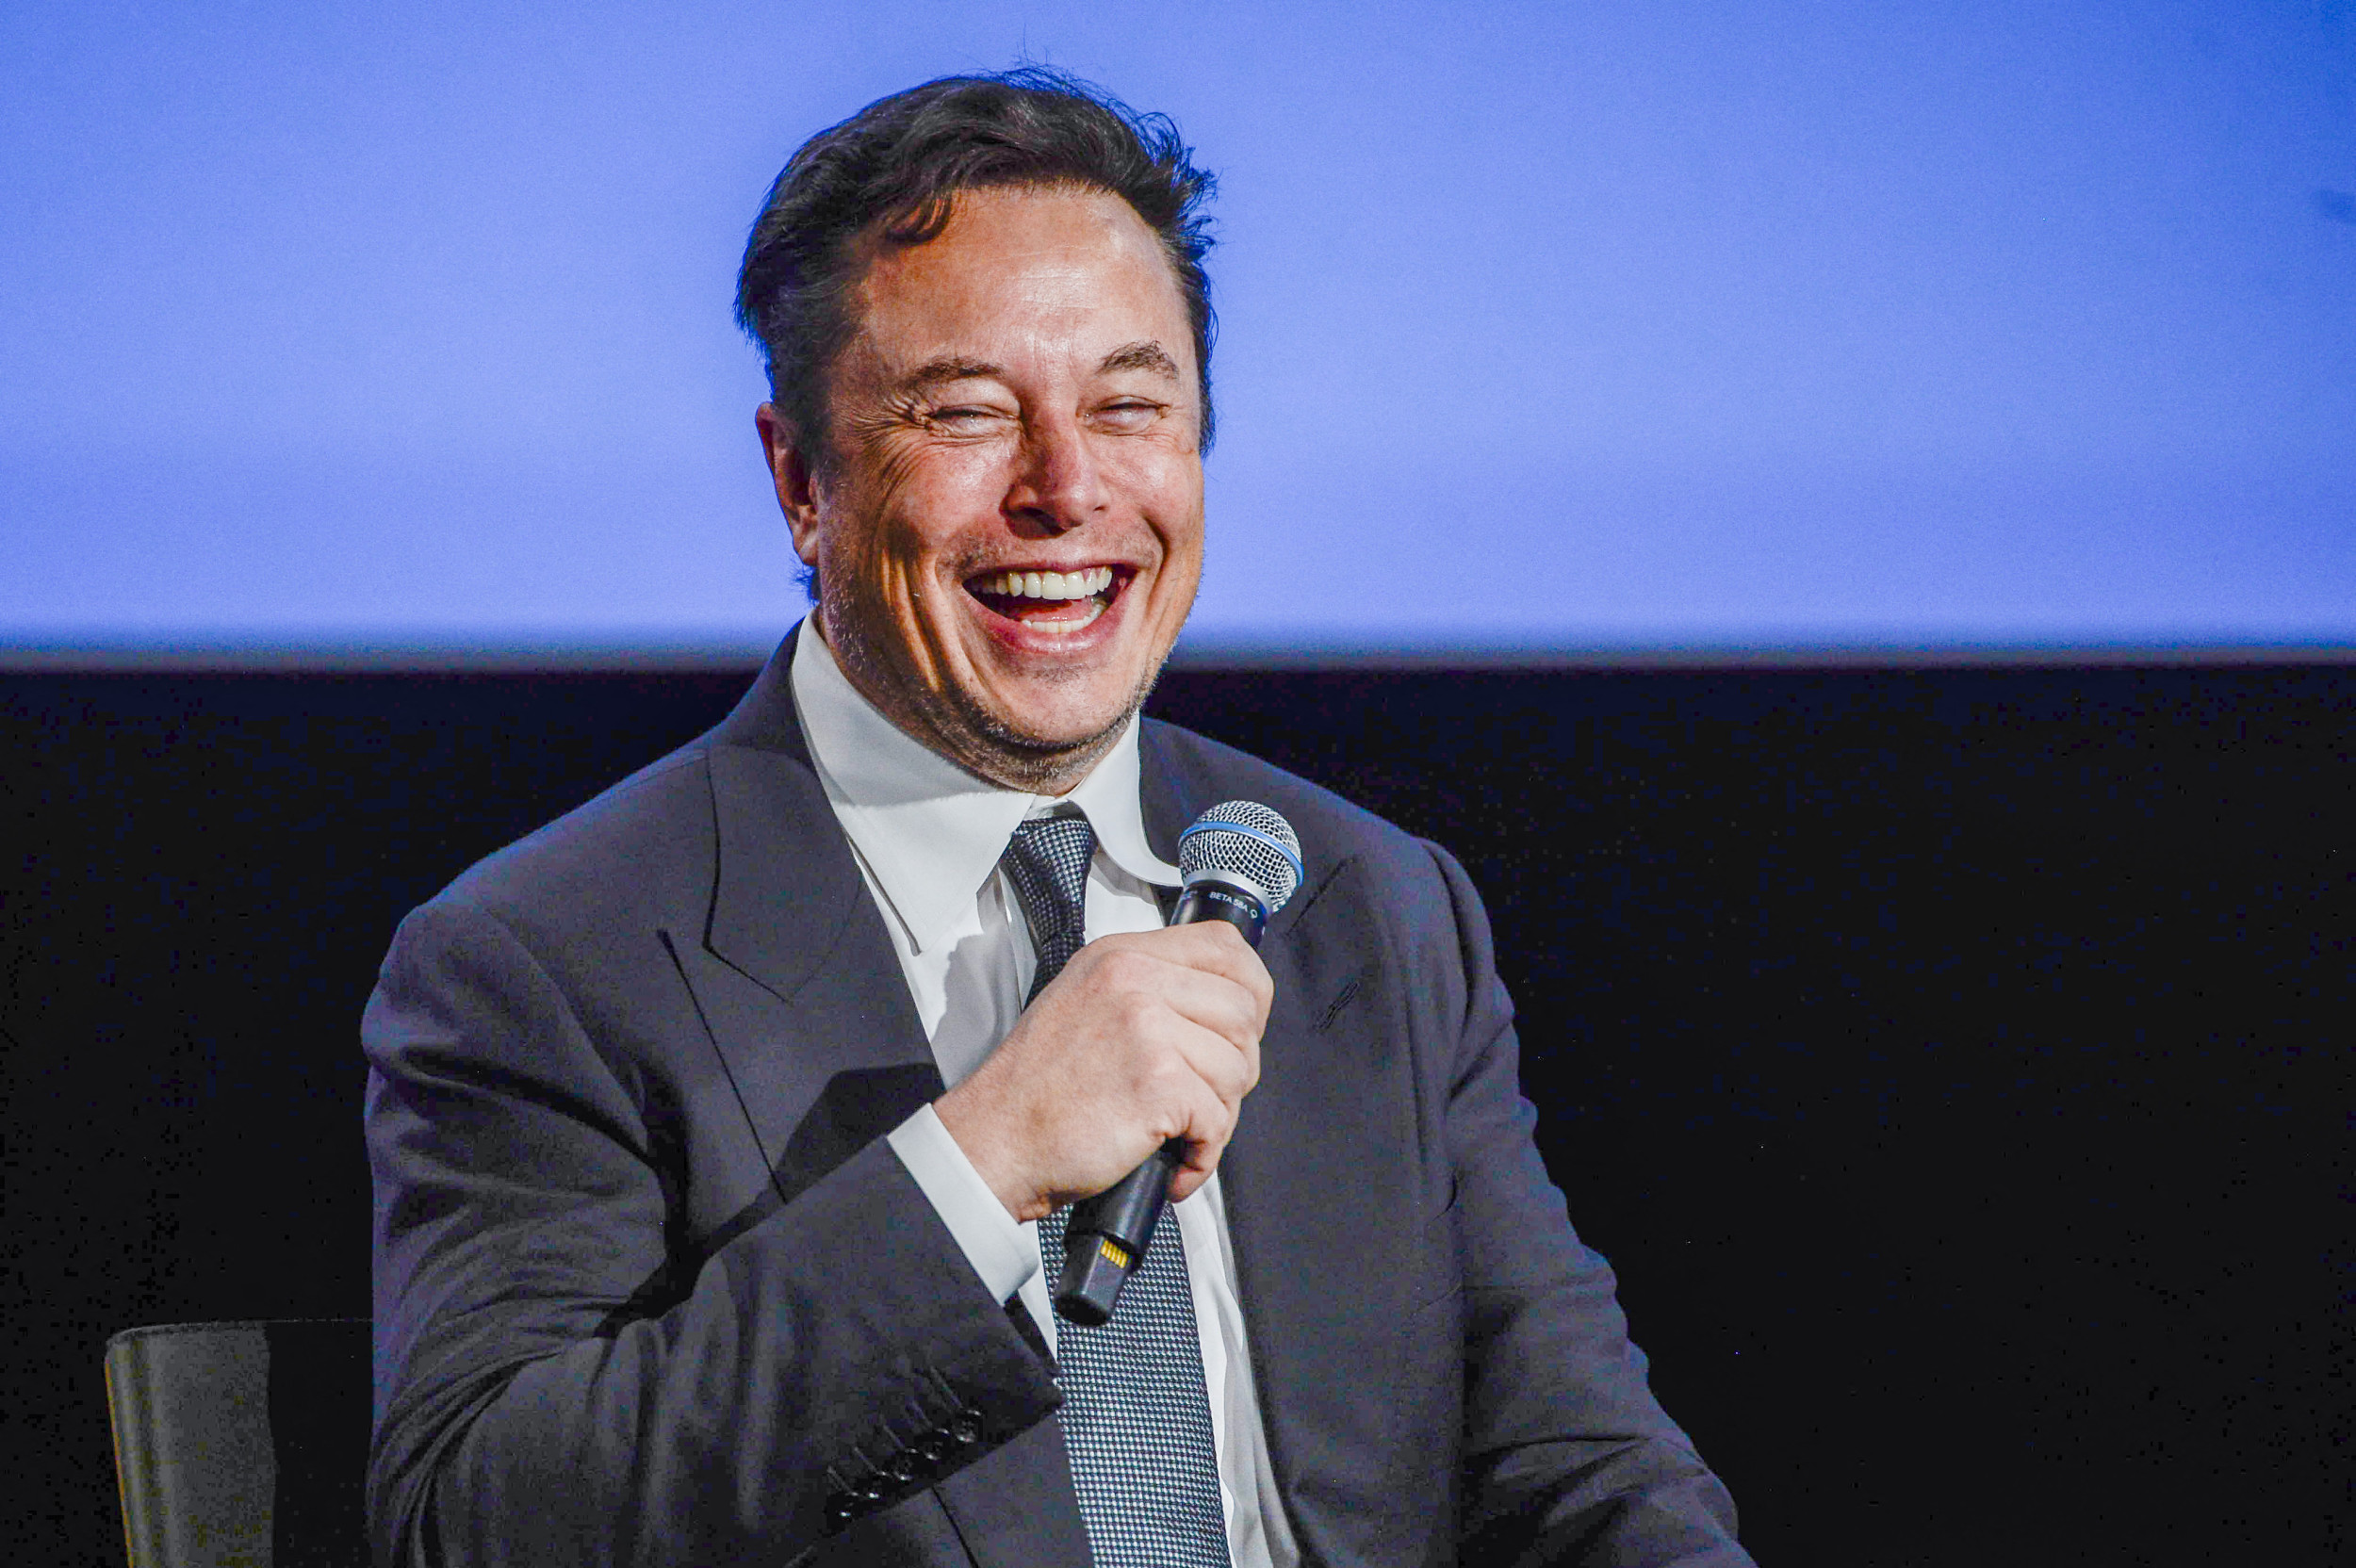 Elon Musk Slammed for Posing With Fake Fired Employees As Workers Lose Jobs